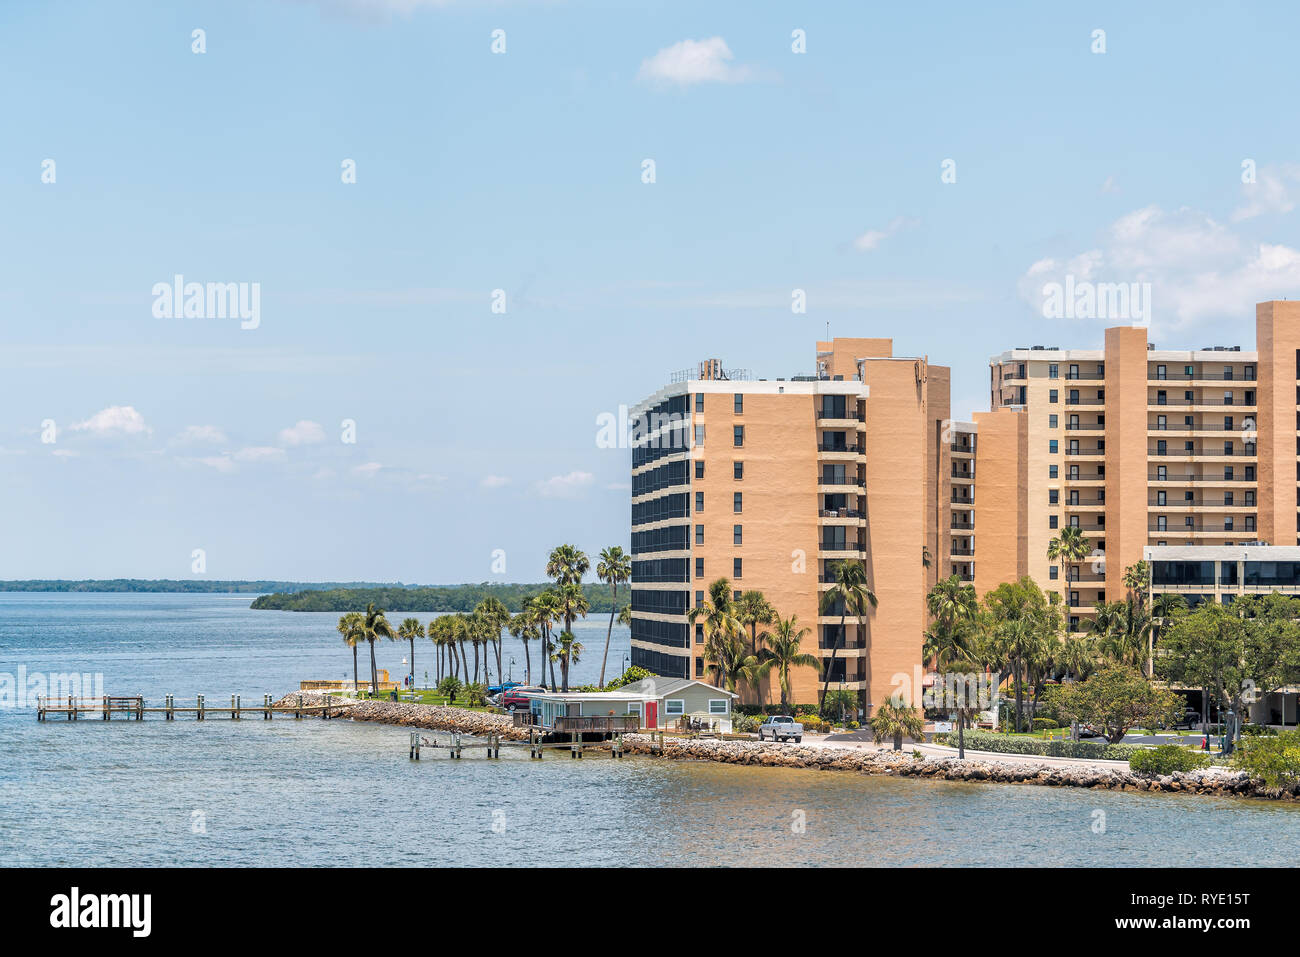 Fort Myers, USA - April 29, 2018: City cityscape skyline with apartment buildings during sunny day in Florida gulf of mexico coast and bay view from S Stock Photo